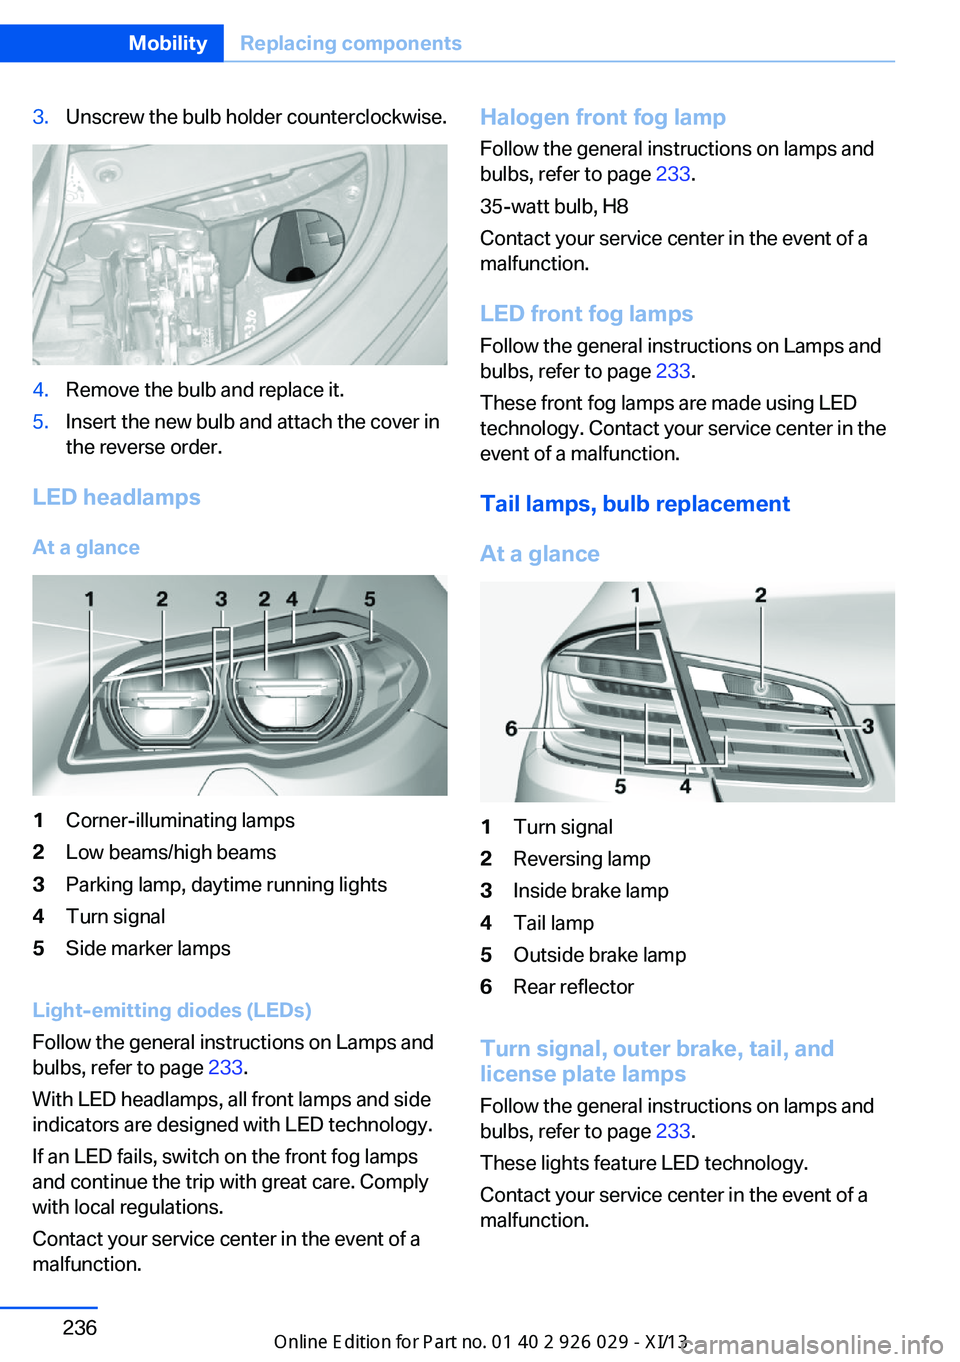 BMW 5 SERIES 2013 F10 Owners Manual 3.Unscrew the bulb holder counterclockwise.4.Remove the bulb and replace it.5.Insert the new bulb and attach the cover in
the reverse order.
LED headlamps
At a glance
1Corner-illuminating lamps2Low be